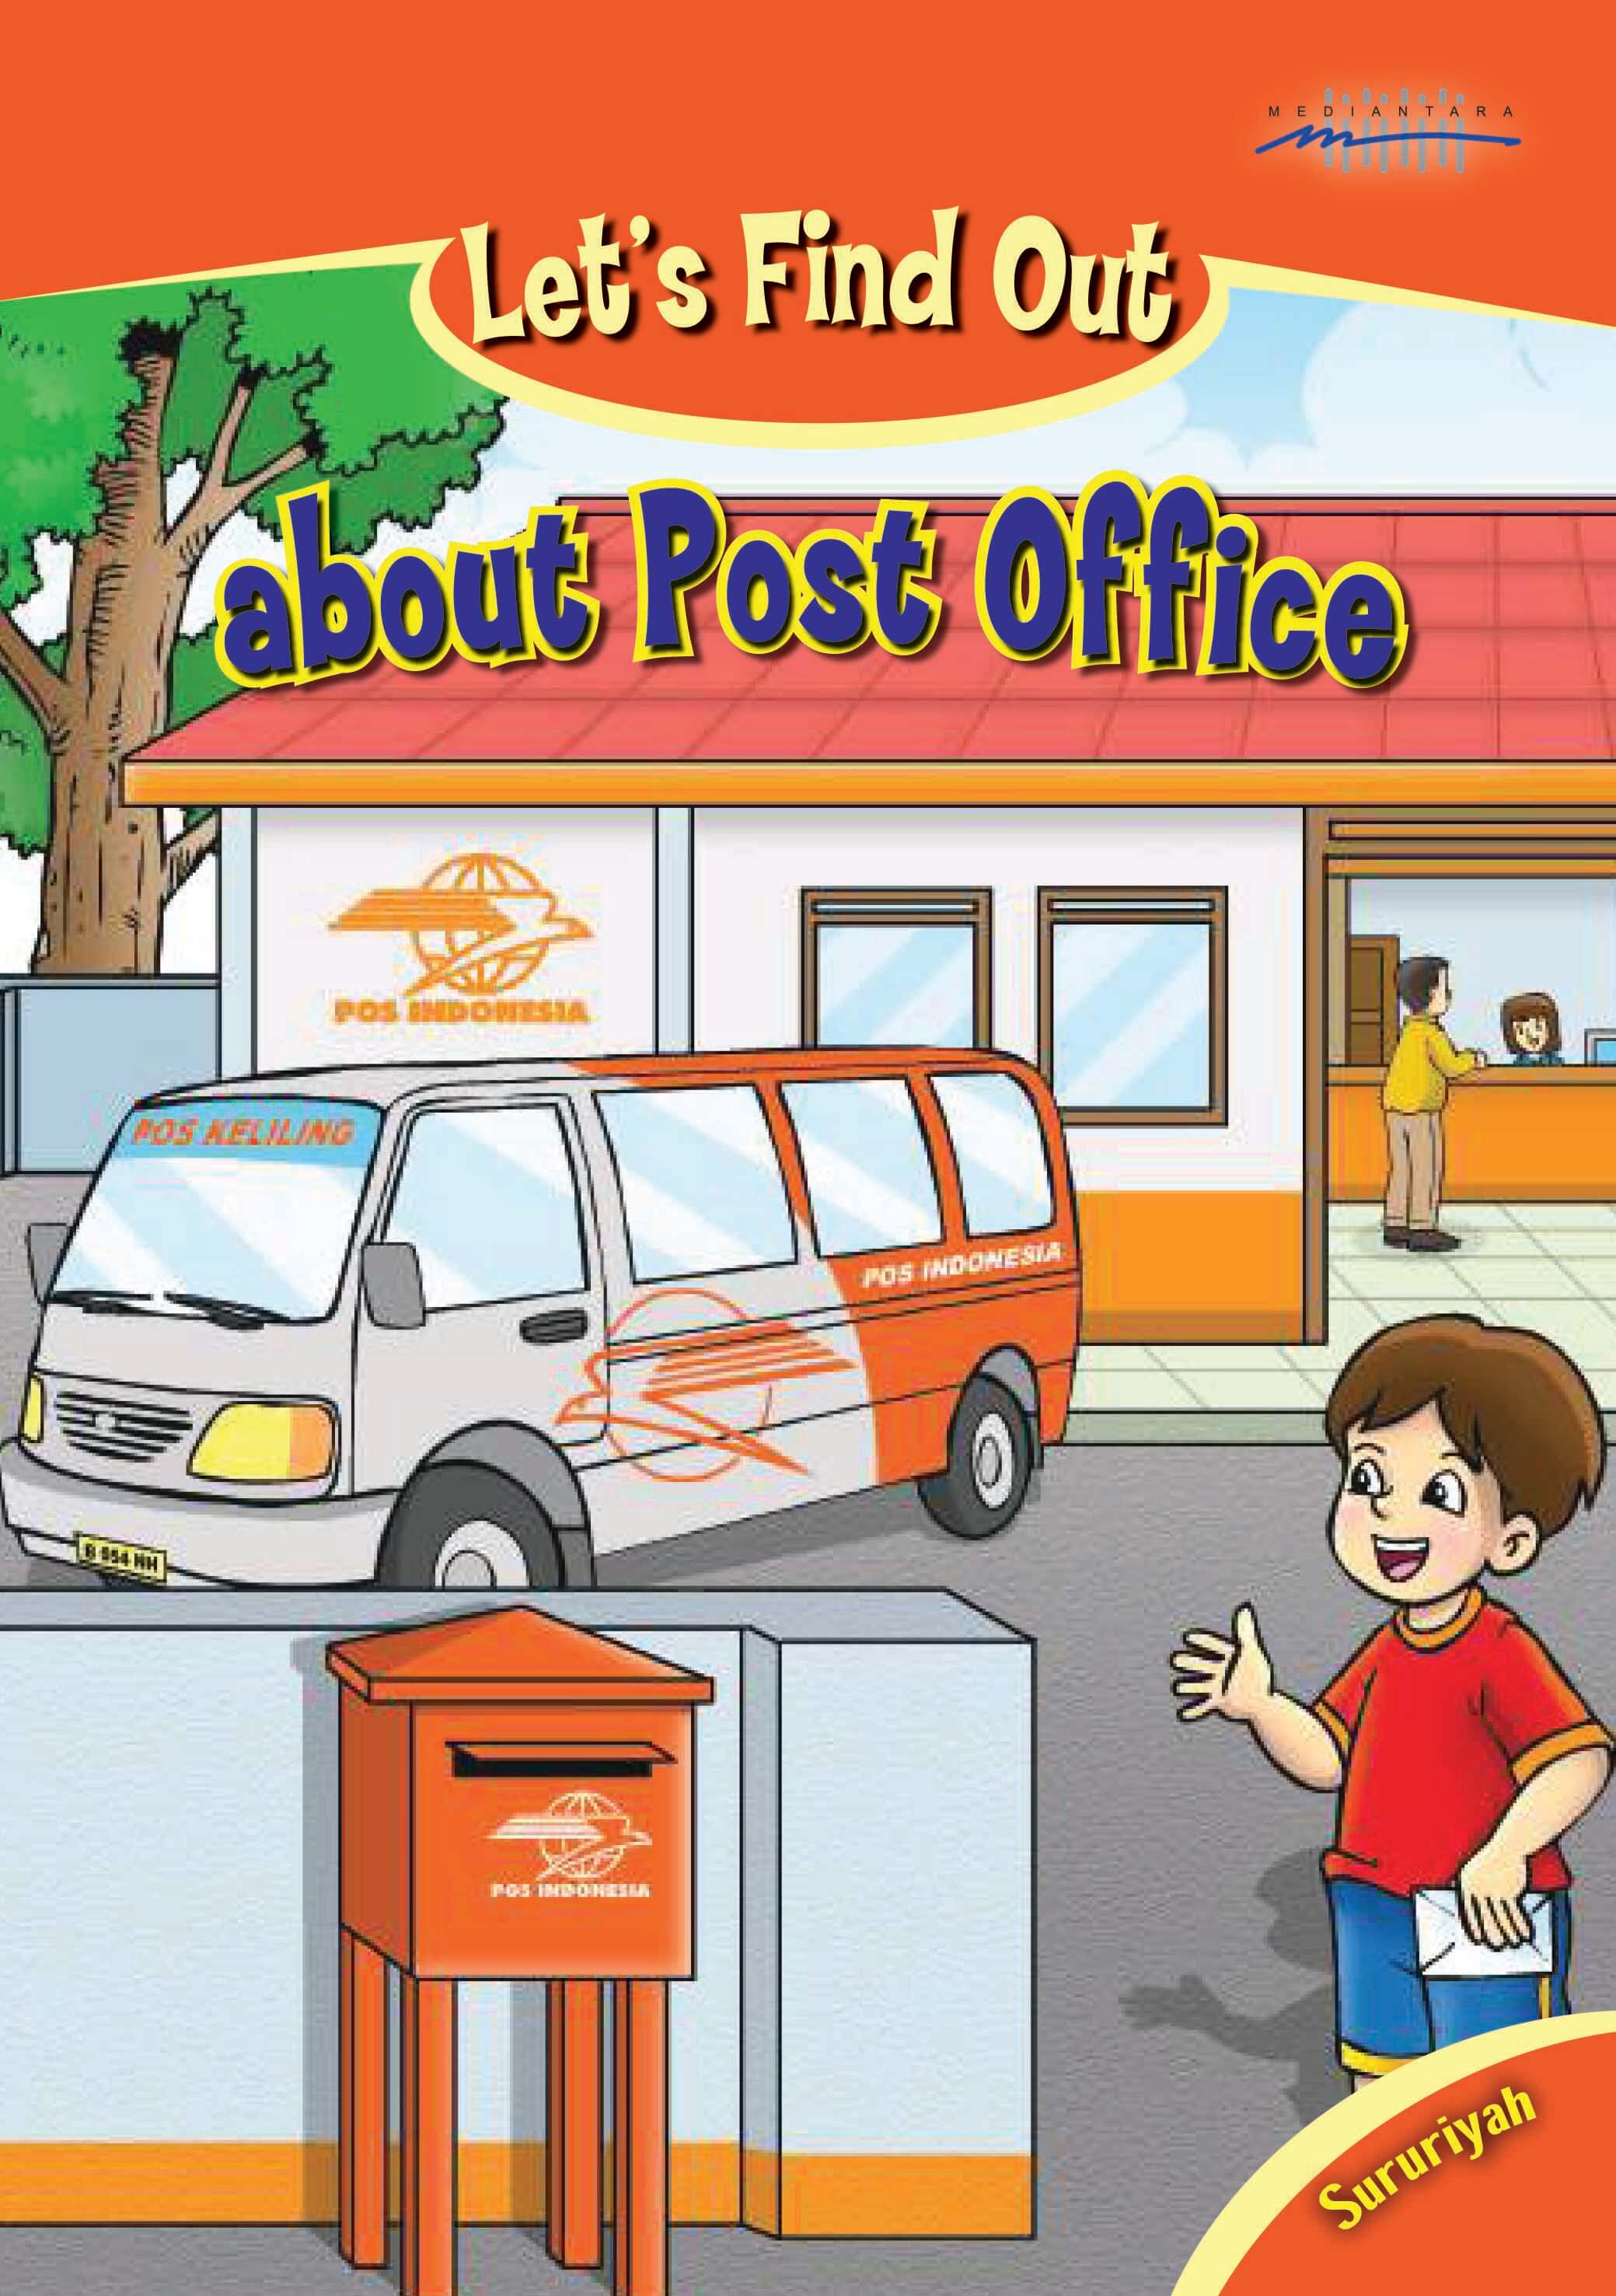 Let's Find Out about the Post Office